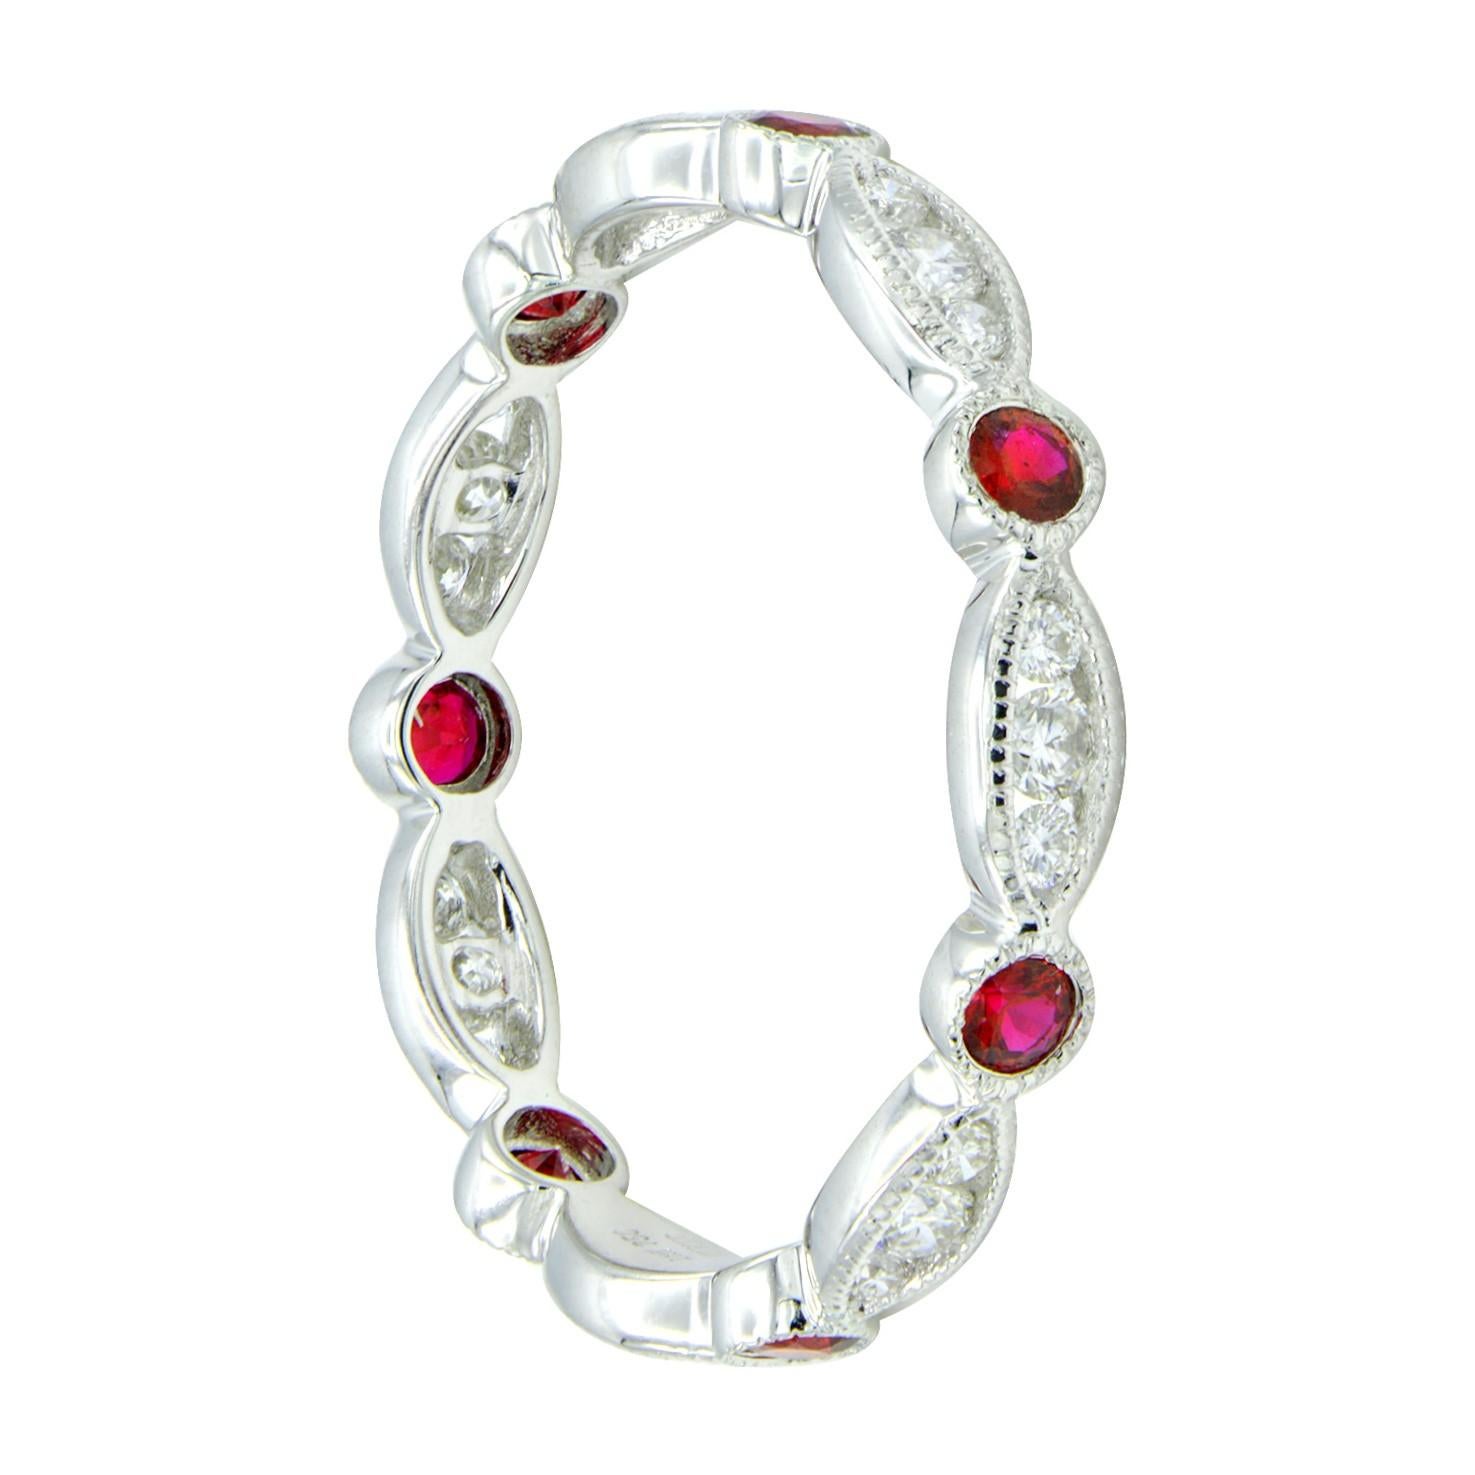 Eternity Rings make an excellent gift, especially this new design. This band contains 7 deep red rubies totaling 0.30 carats with 21 round VS2, G color diamonds in between totaling 0.30 carats. Which are set in 1.6 grams of 18 karat white gold. 